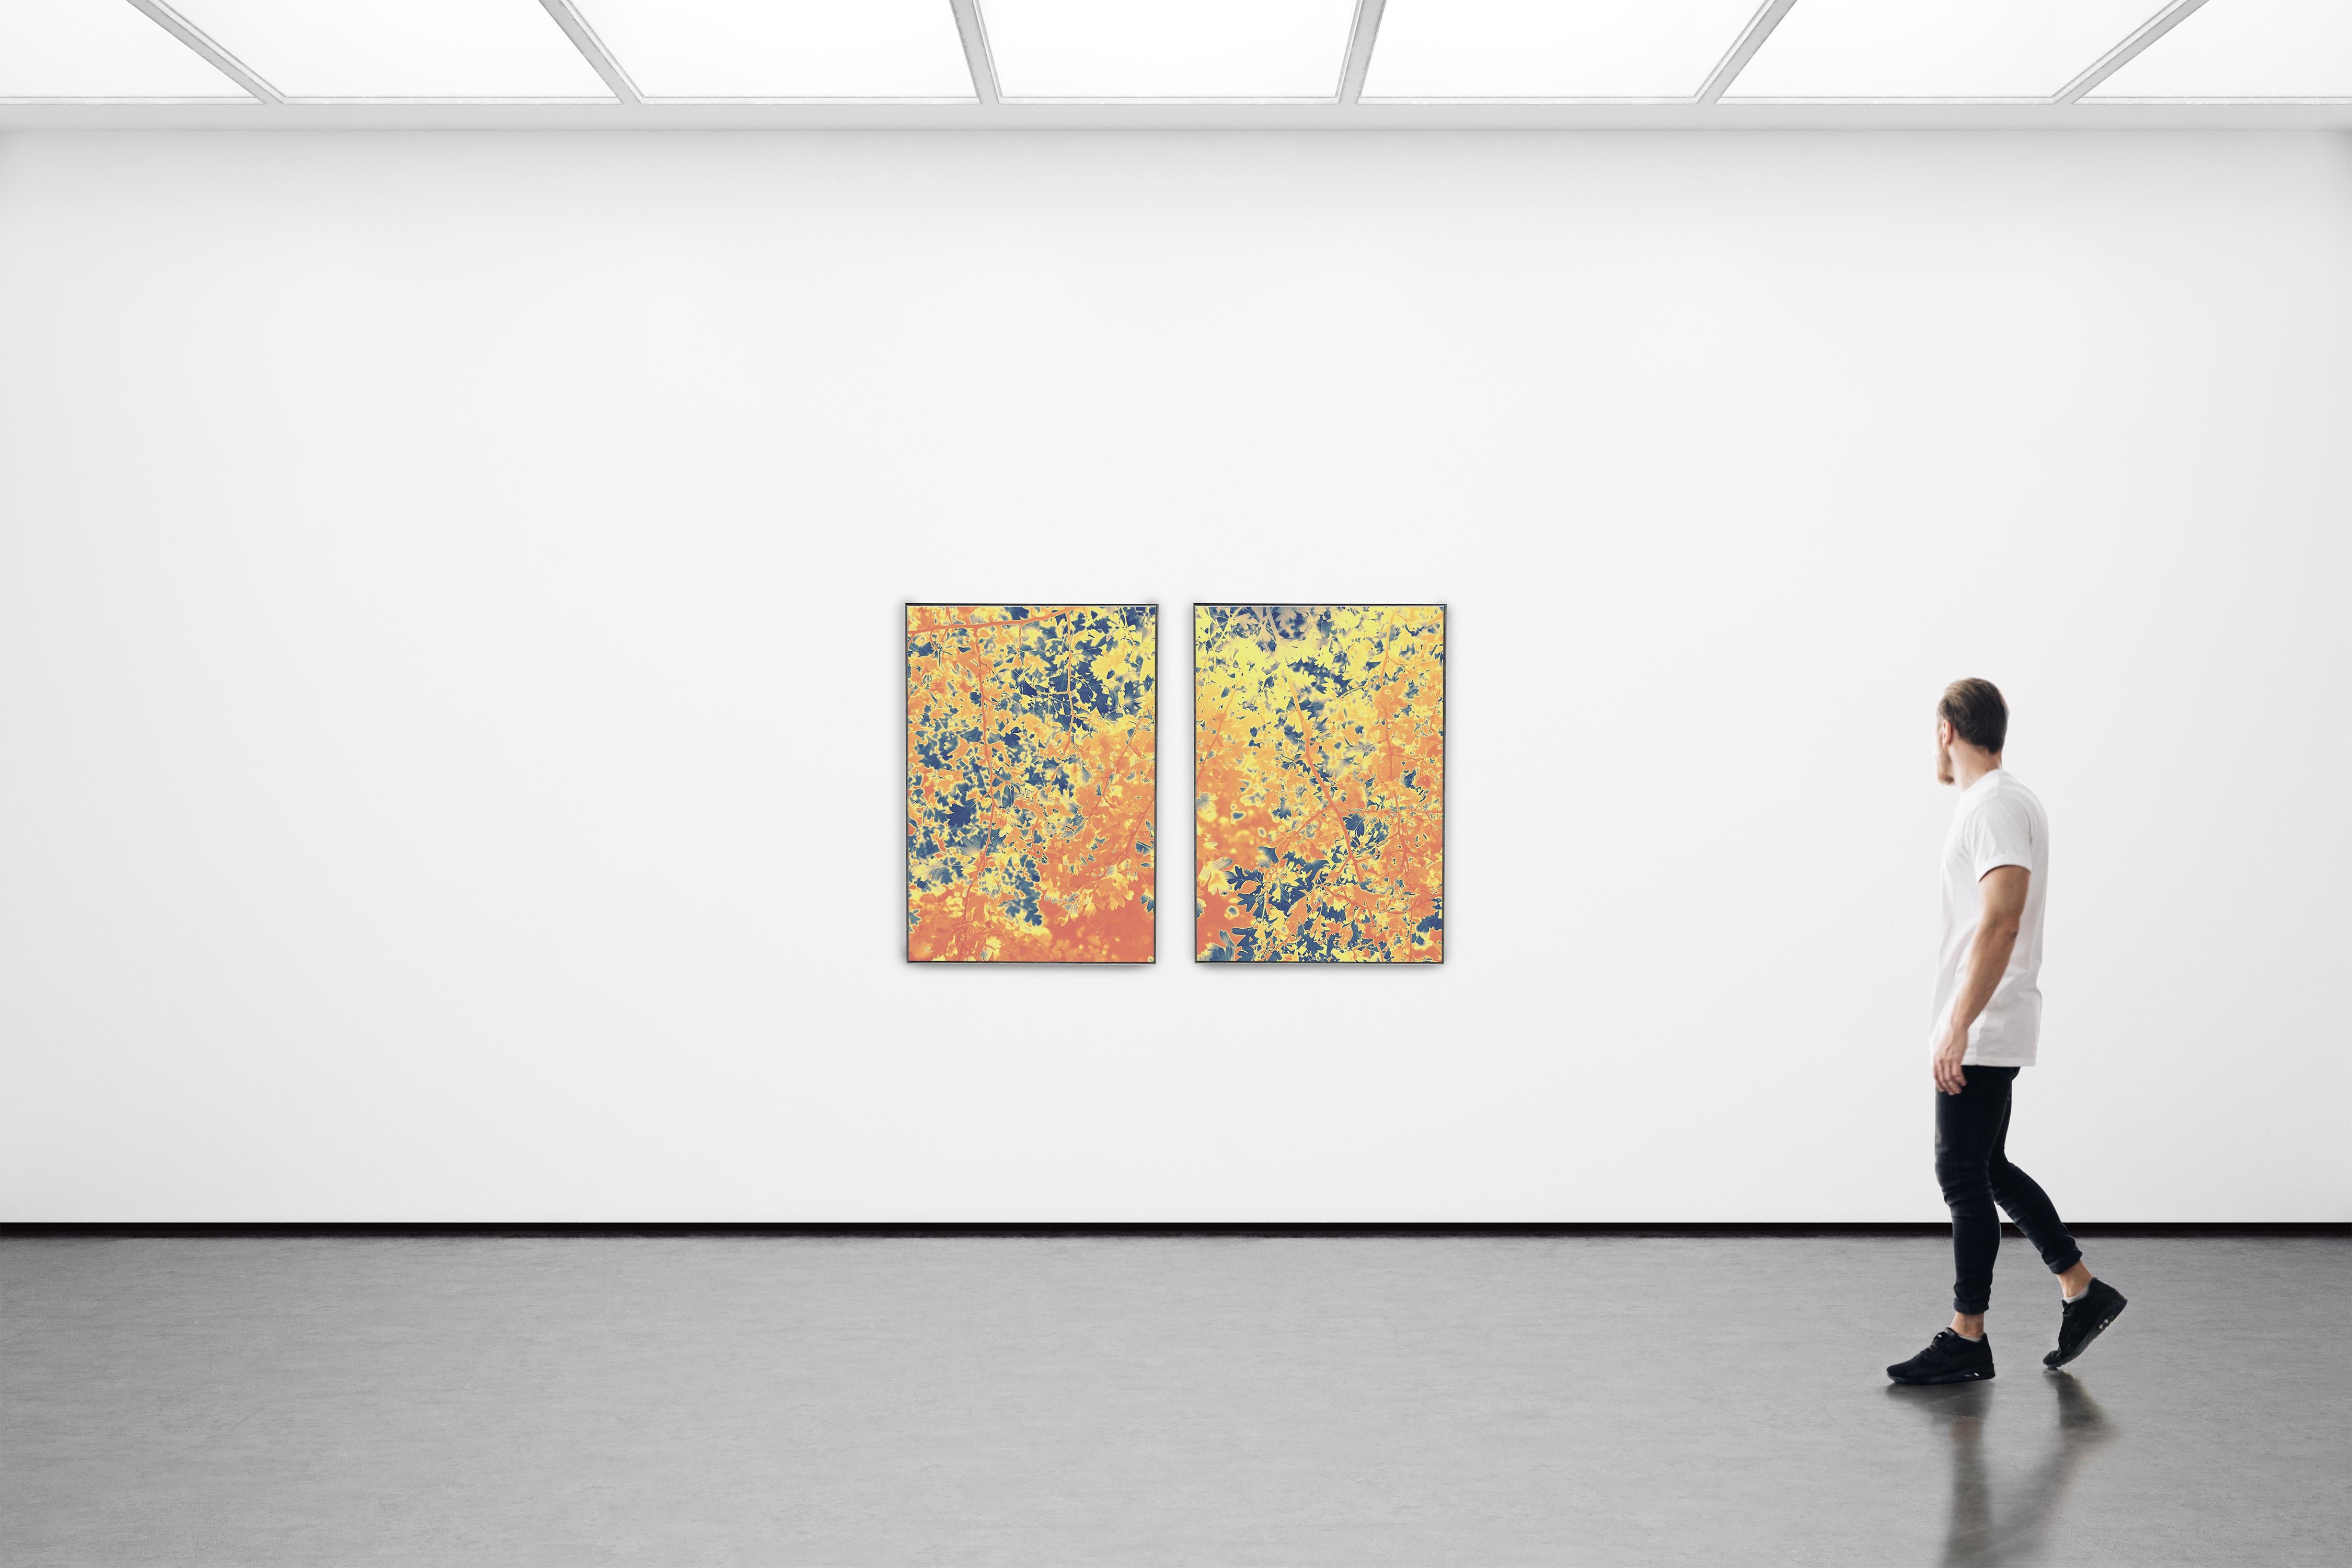 Forest Embers, Giclée Print Diptych Landscape, Warm Tons Abstract Autumn Leaves  For Sale 2